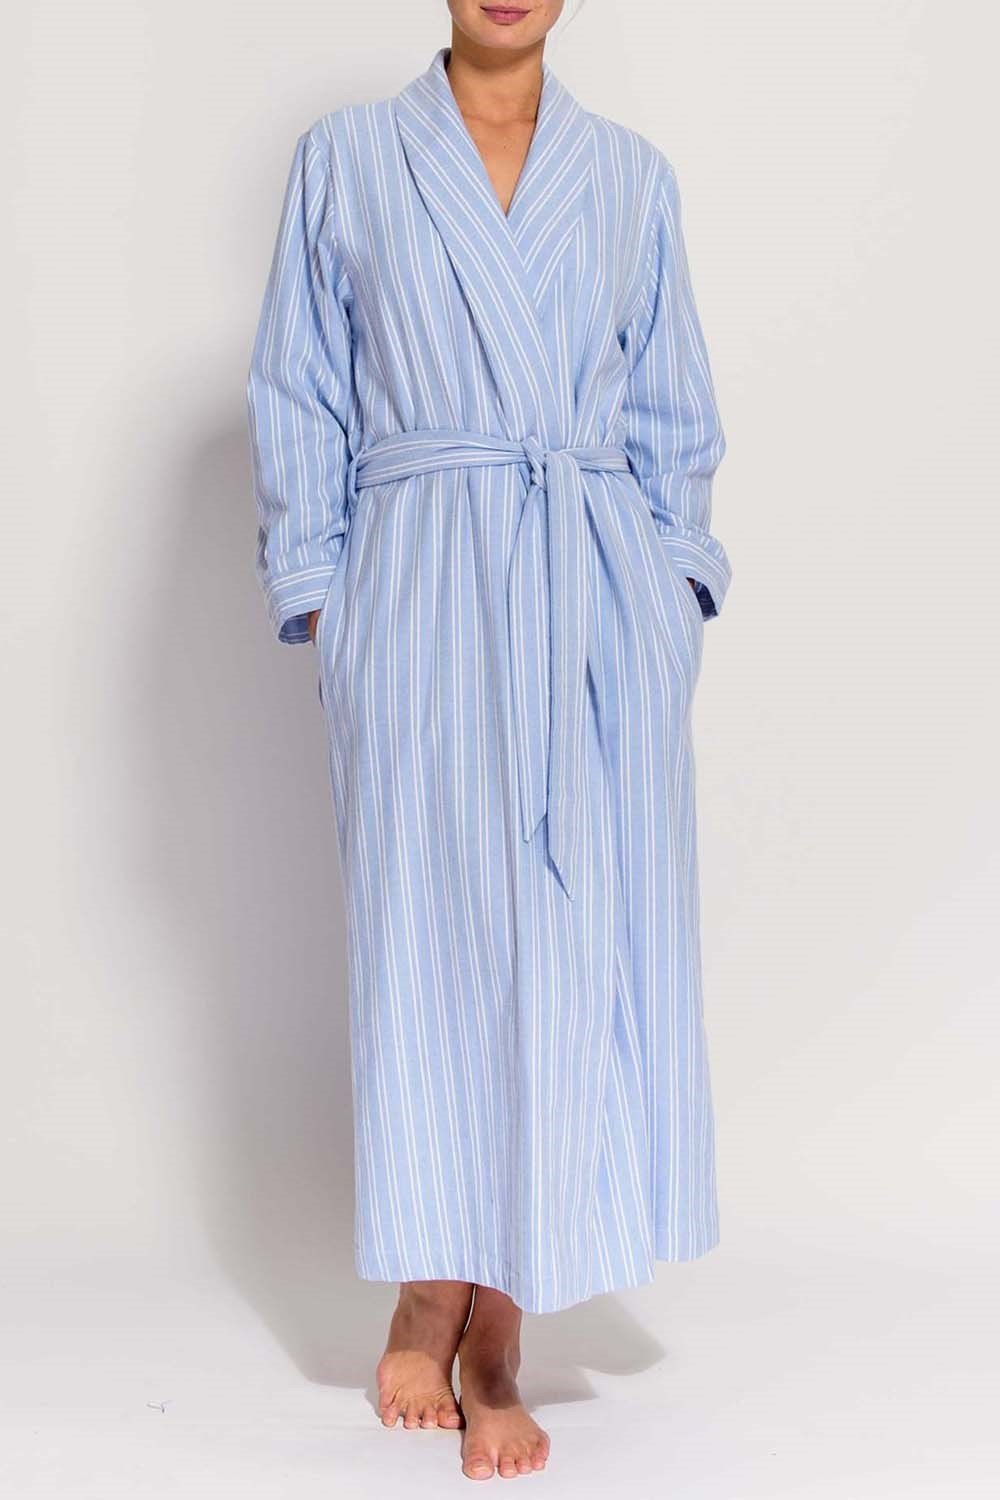 Westwood Womens Stripe Cotton Dressing Gown -